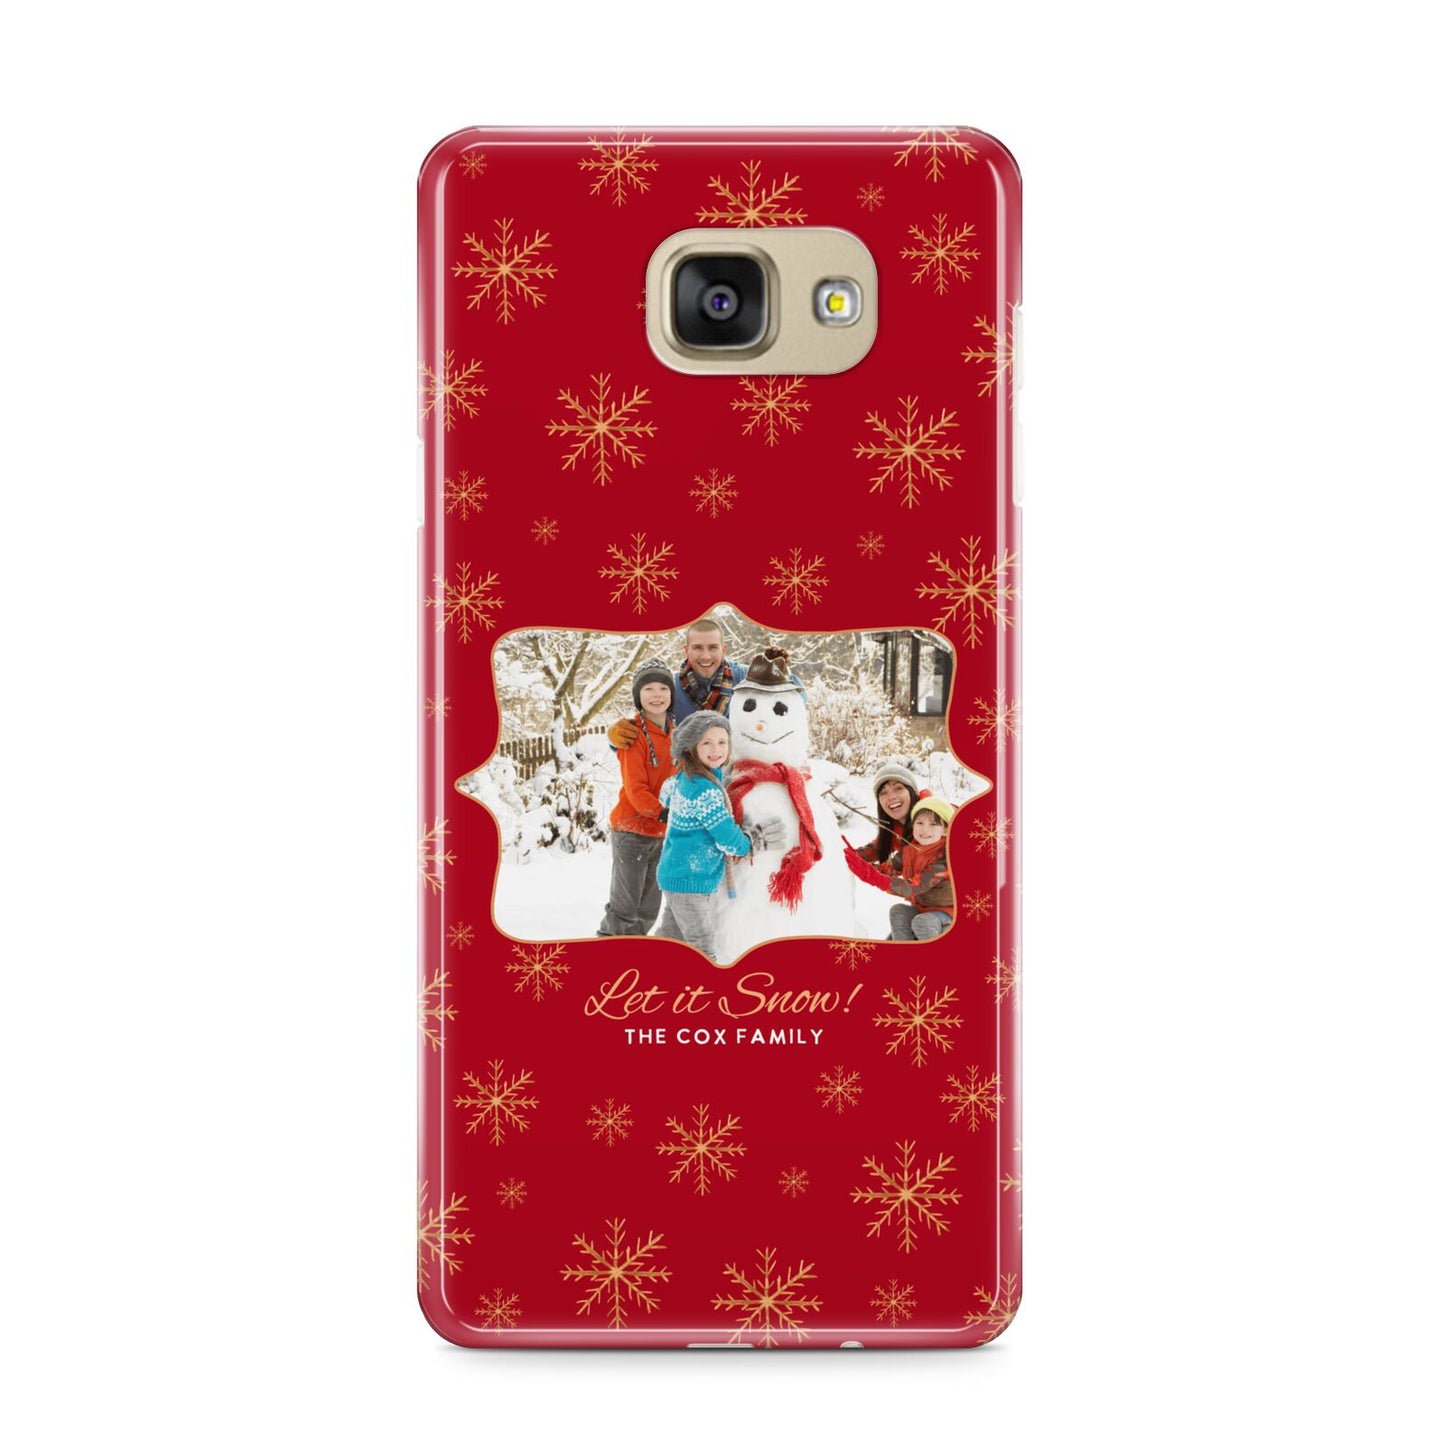 Let it Snow Christmas Photo Upload Samsung Galaxy A9 2016 Case on gold phone